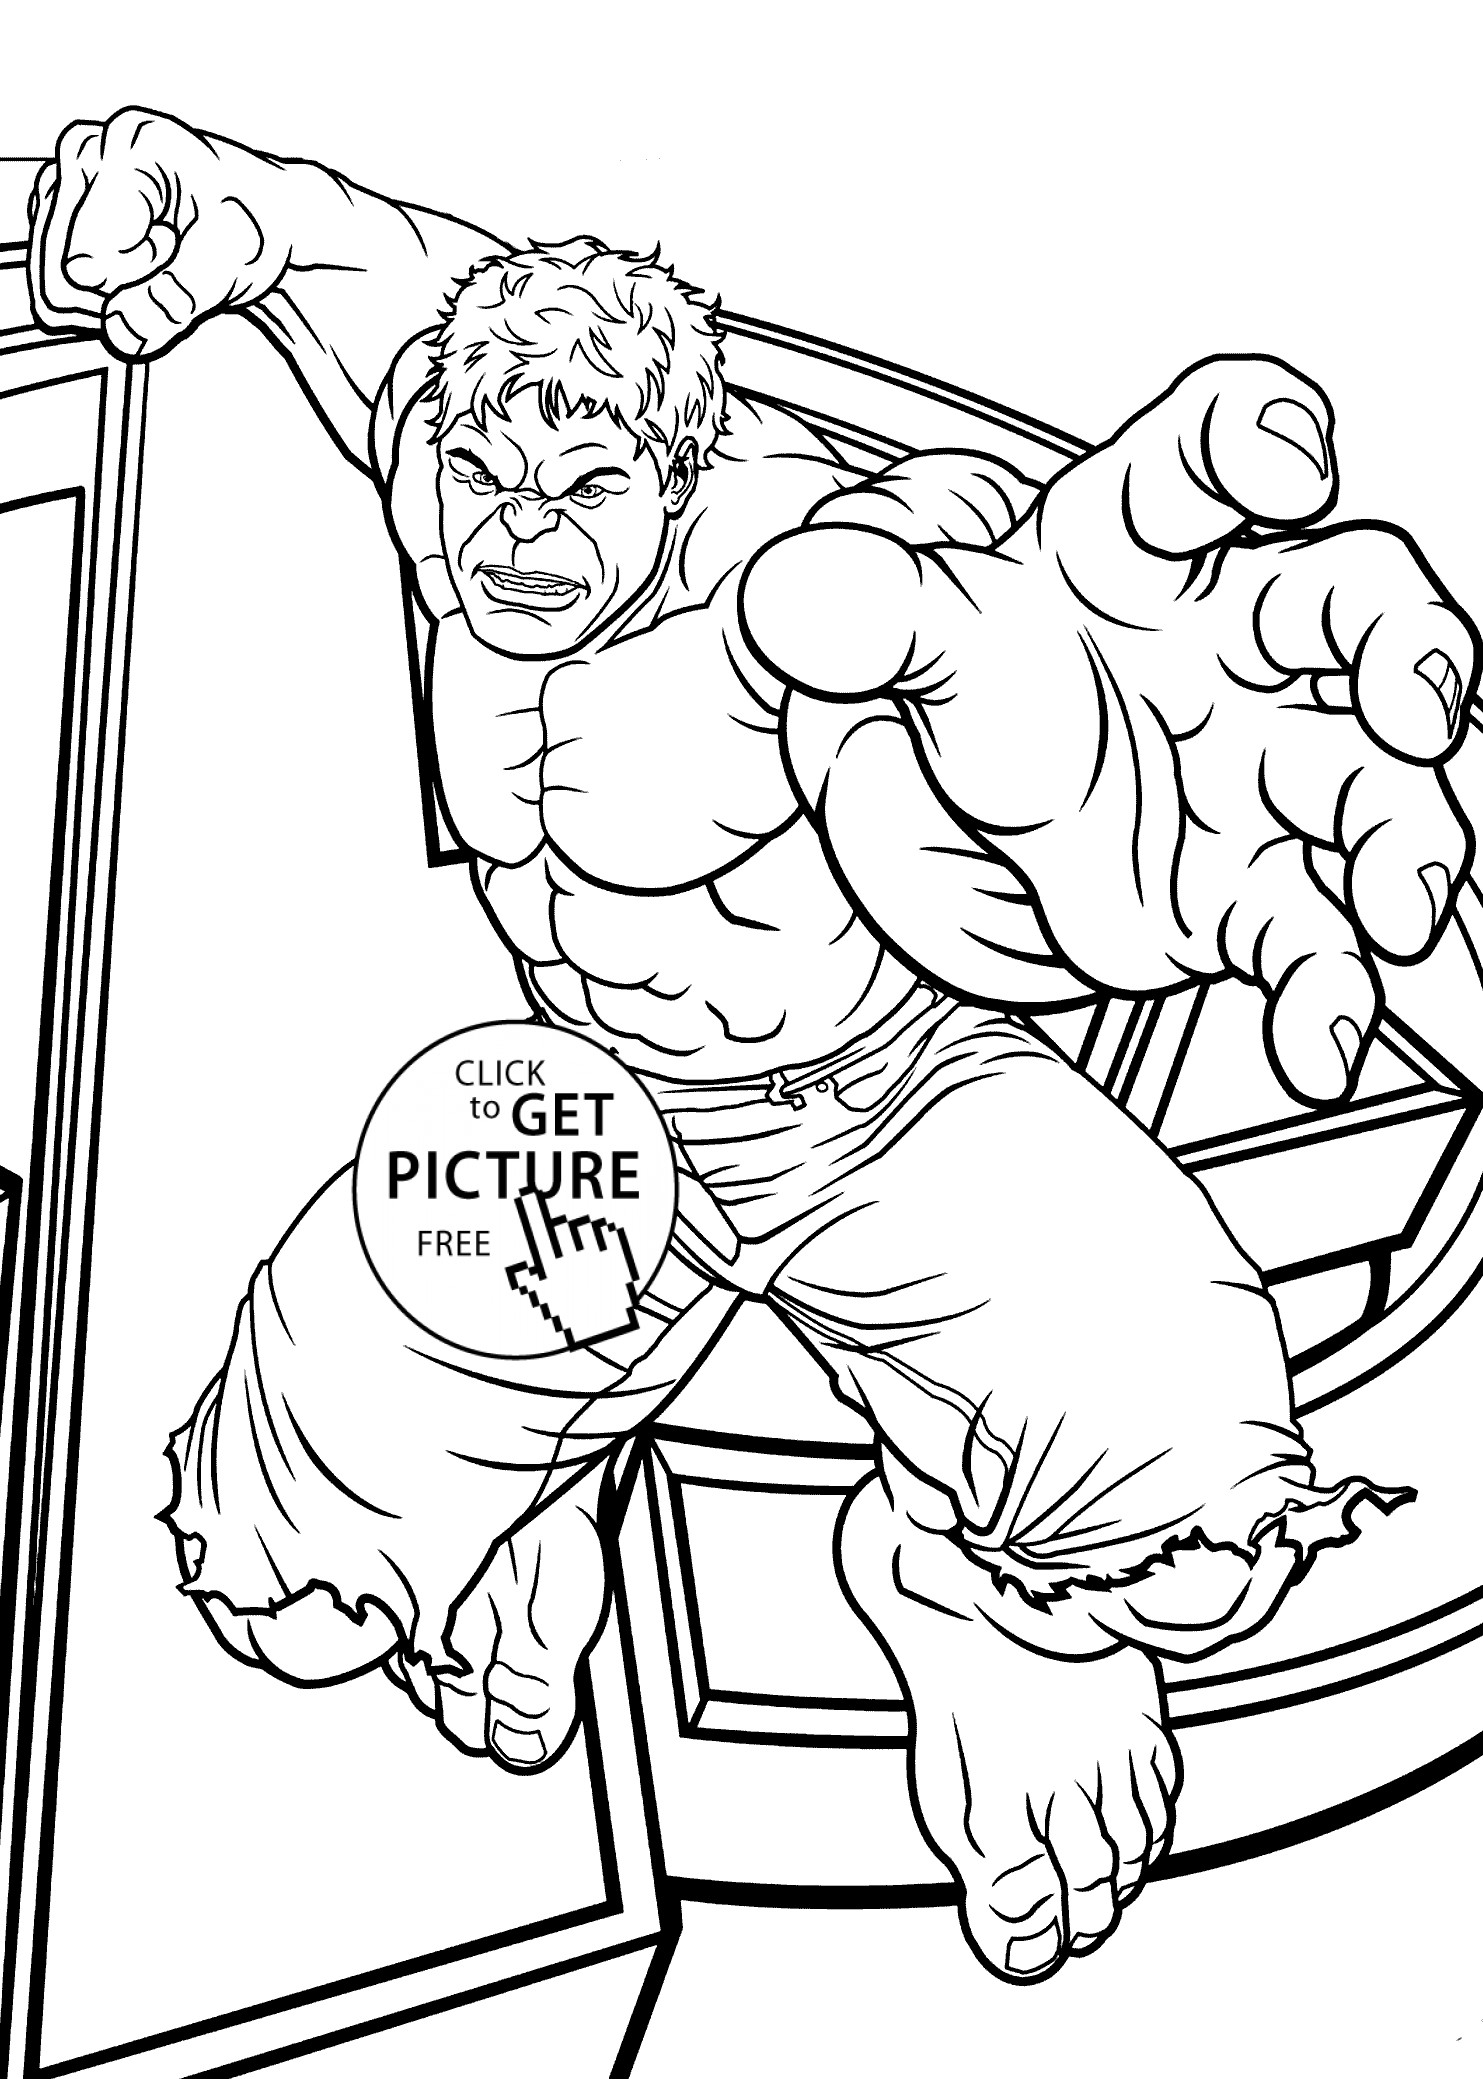 Printable Toddler Coloring Pages
 Hulk jumps coloring pages for kids printable free